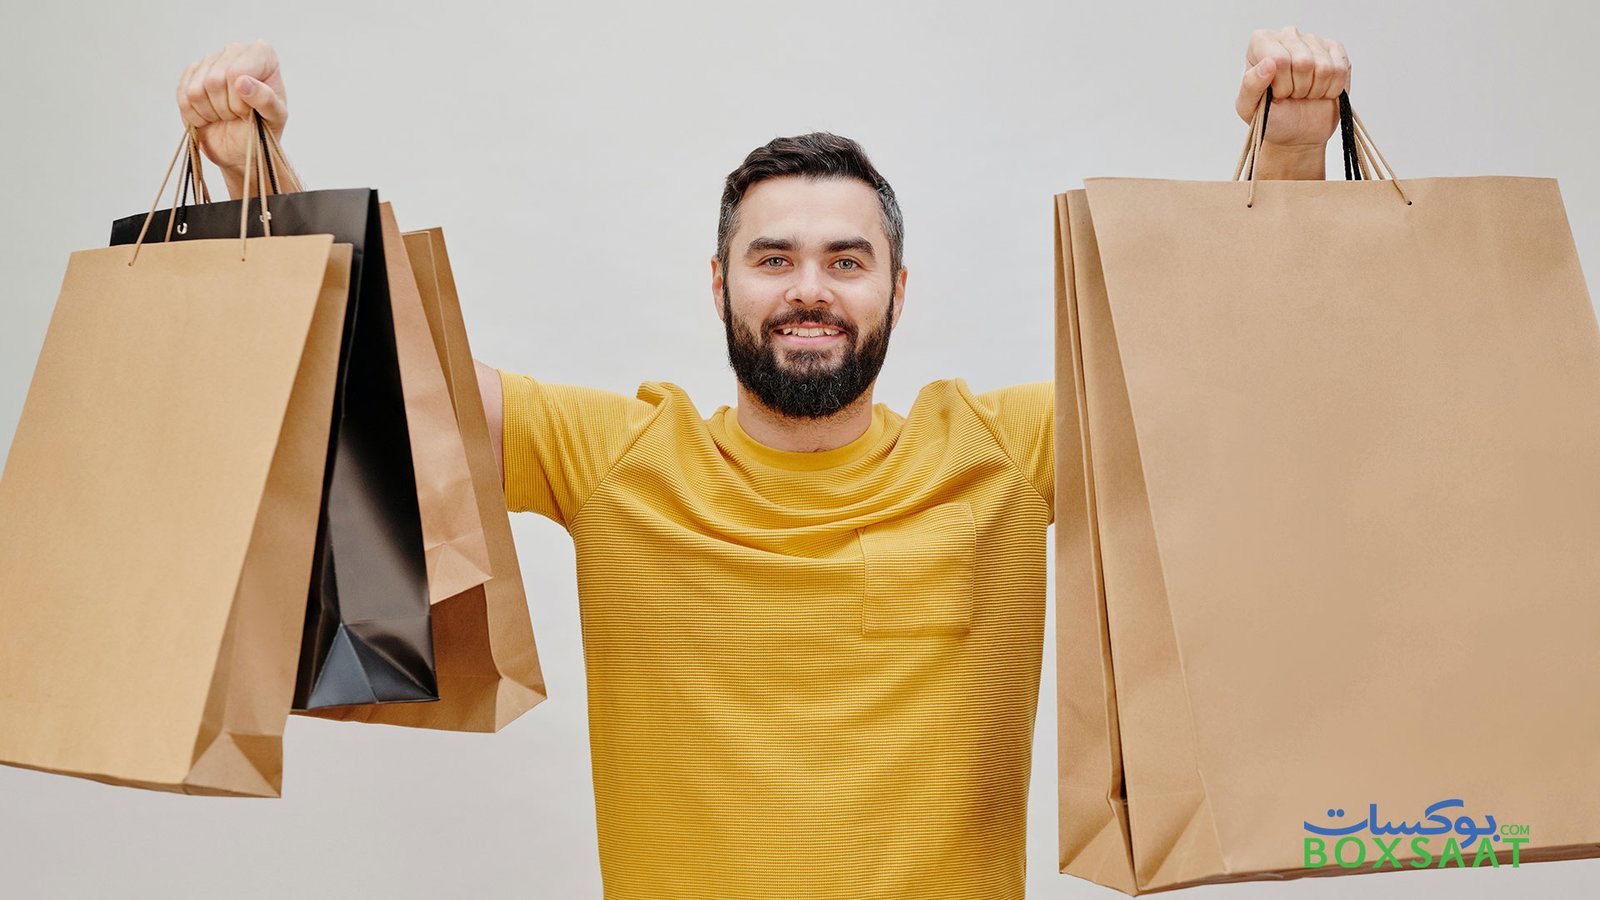 man-showing-kraft-paper-bags-in-different-colors-sizes